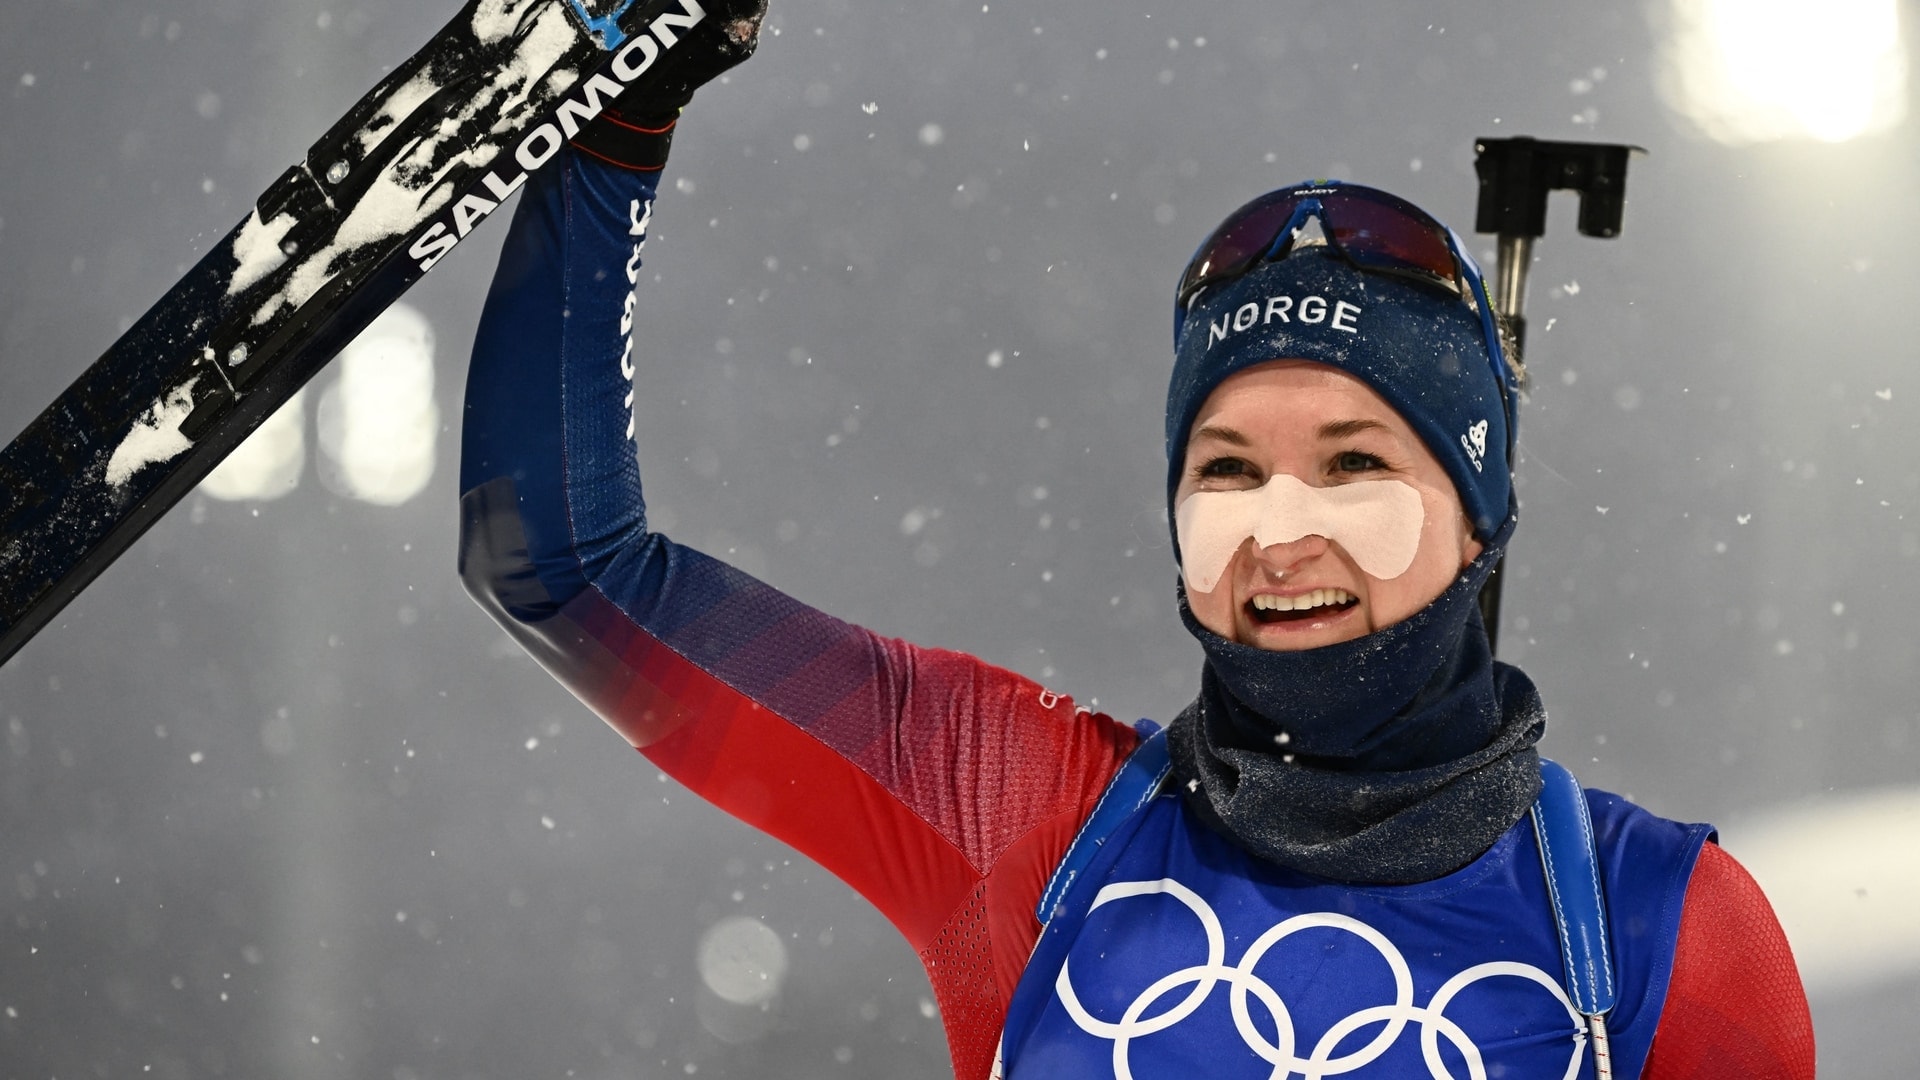 Roeiseland makes biathlon history with third Olympic gold in 10km pursuit